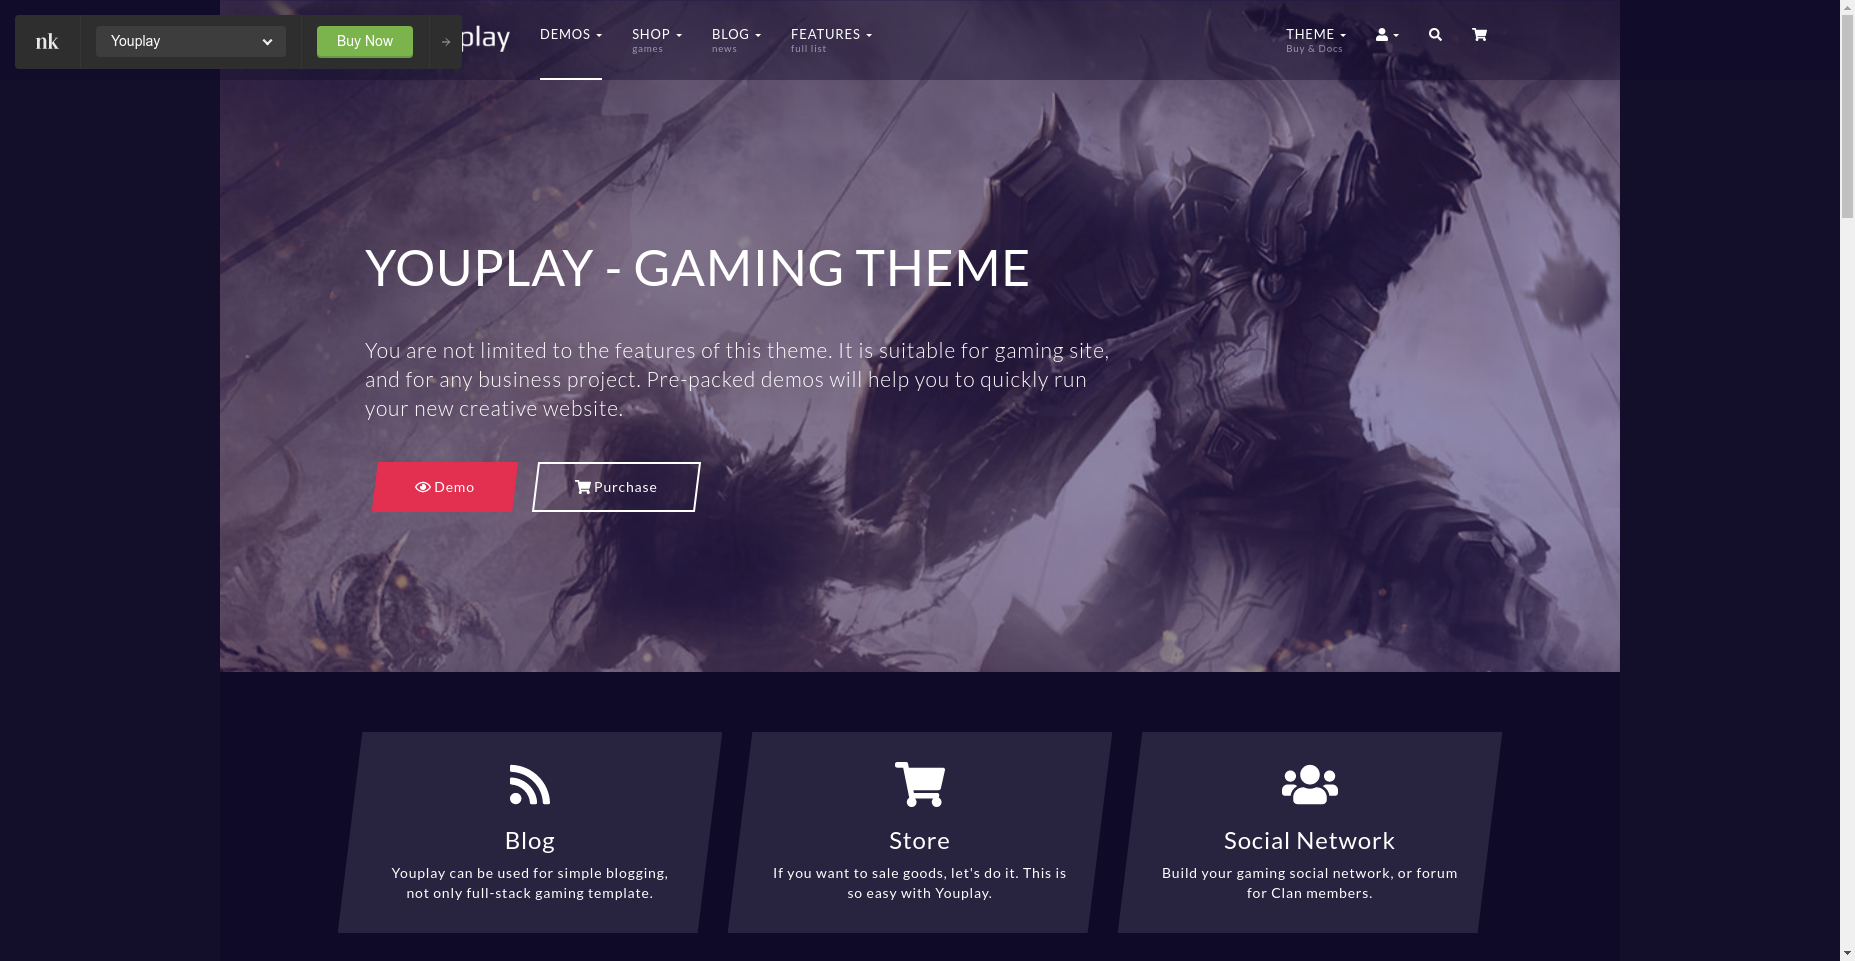 new-and-trending-gaming-website-templates-bootstrapdash